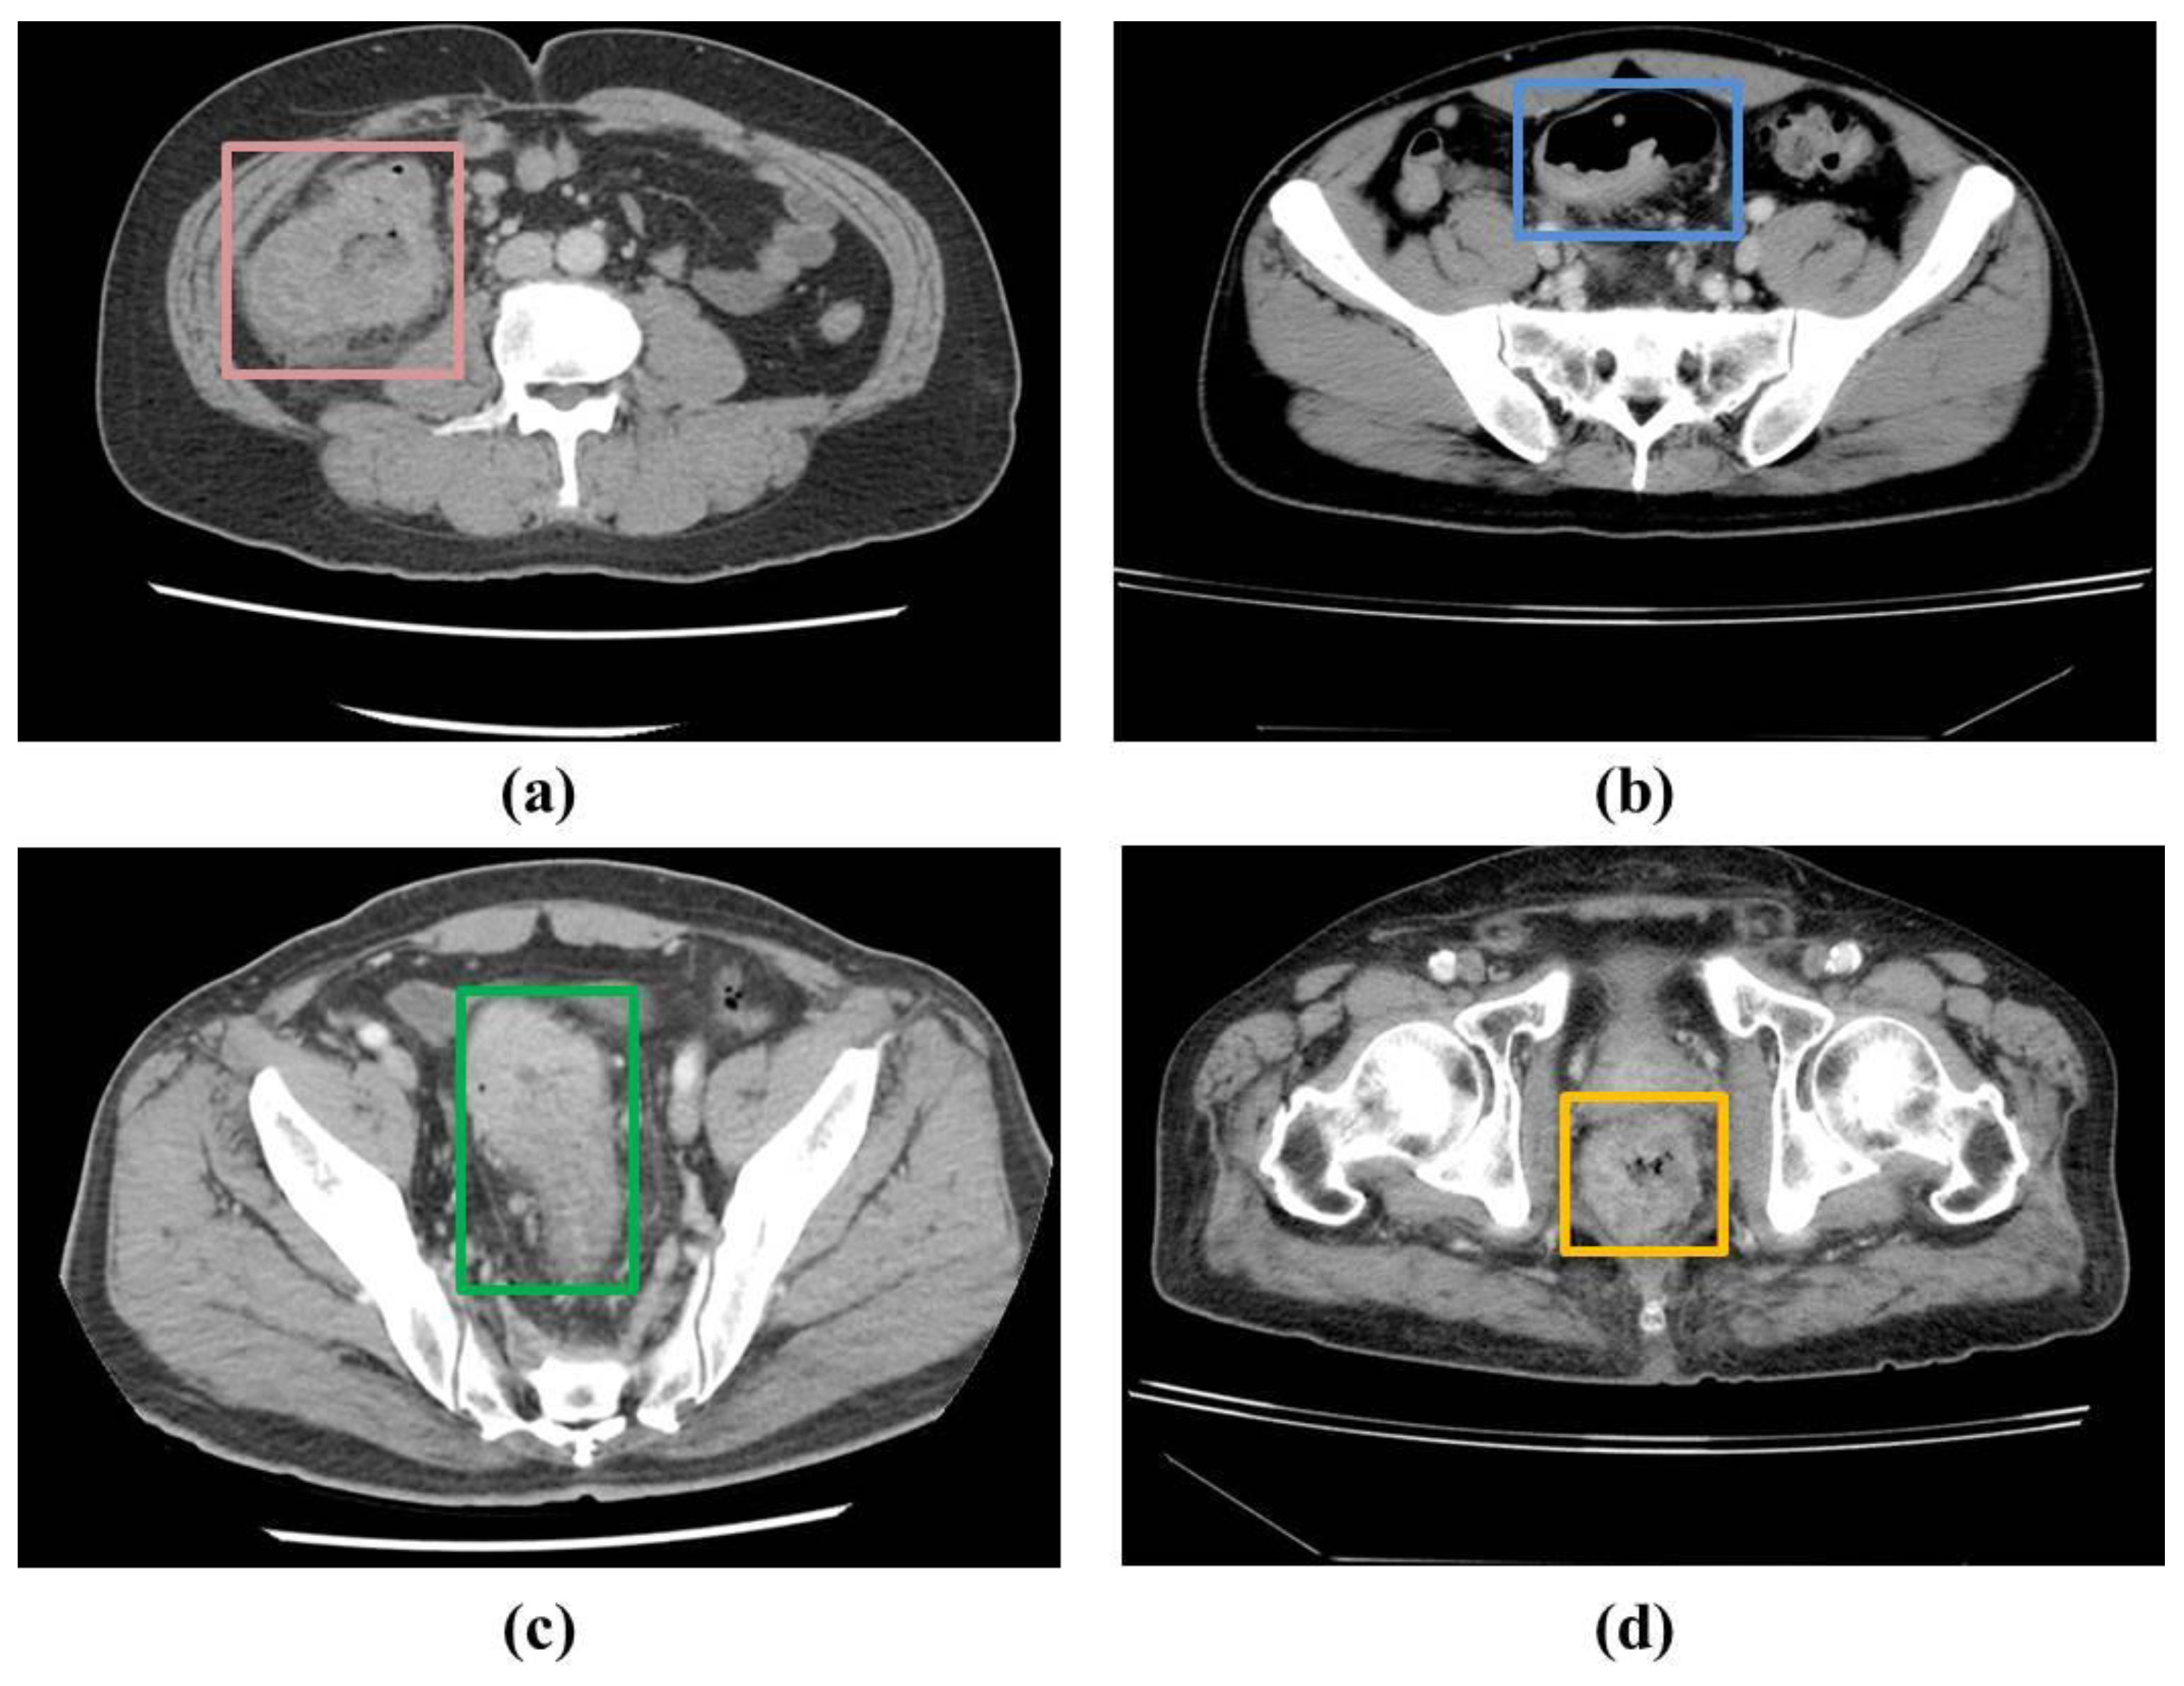 Bioengineering Free Full-Text Localization of Colorectal Cancer Lesions in Contrast-Computed Tomography Images via a Deep Learning Approach